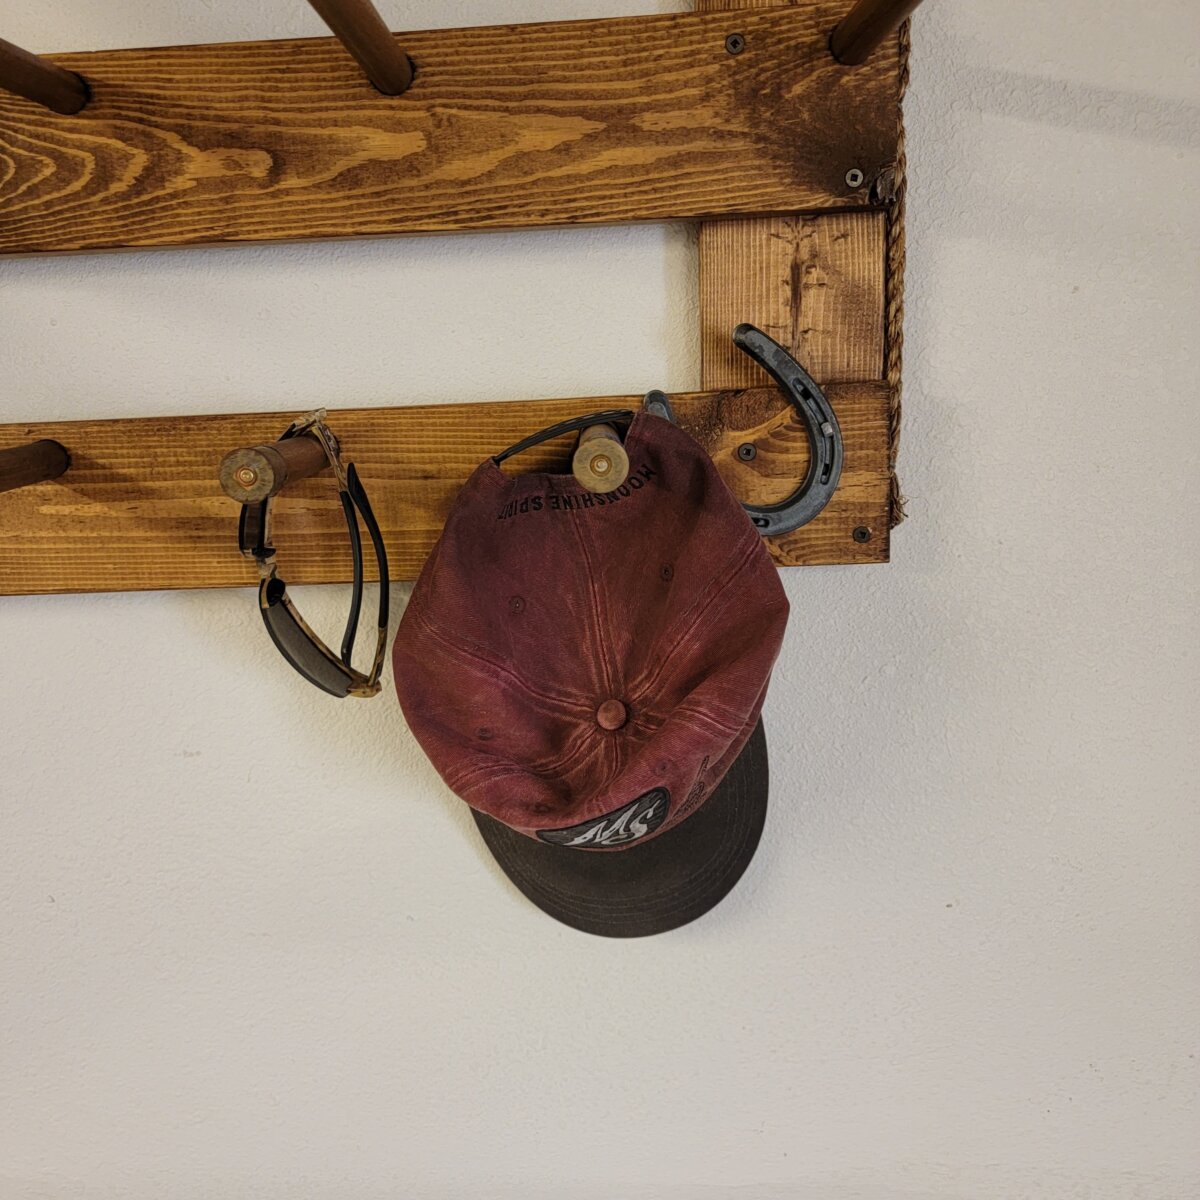 The Hat Hook